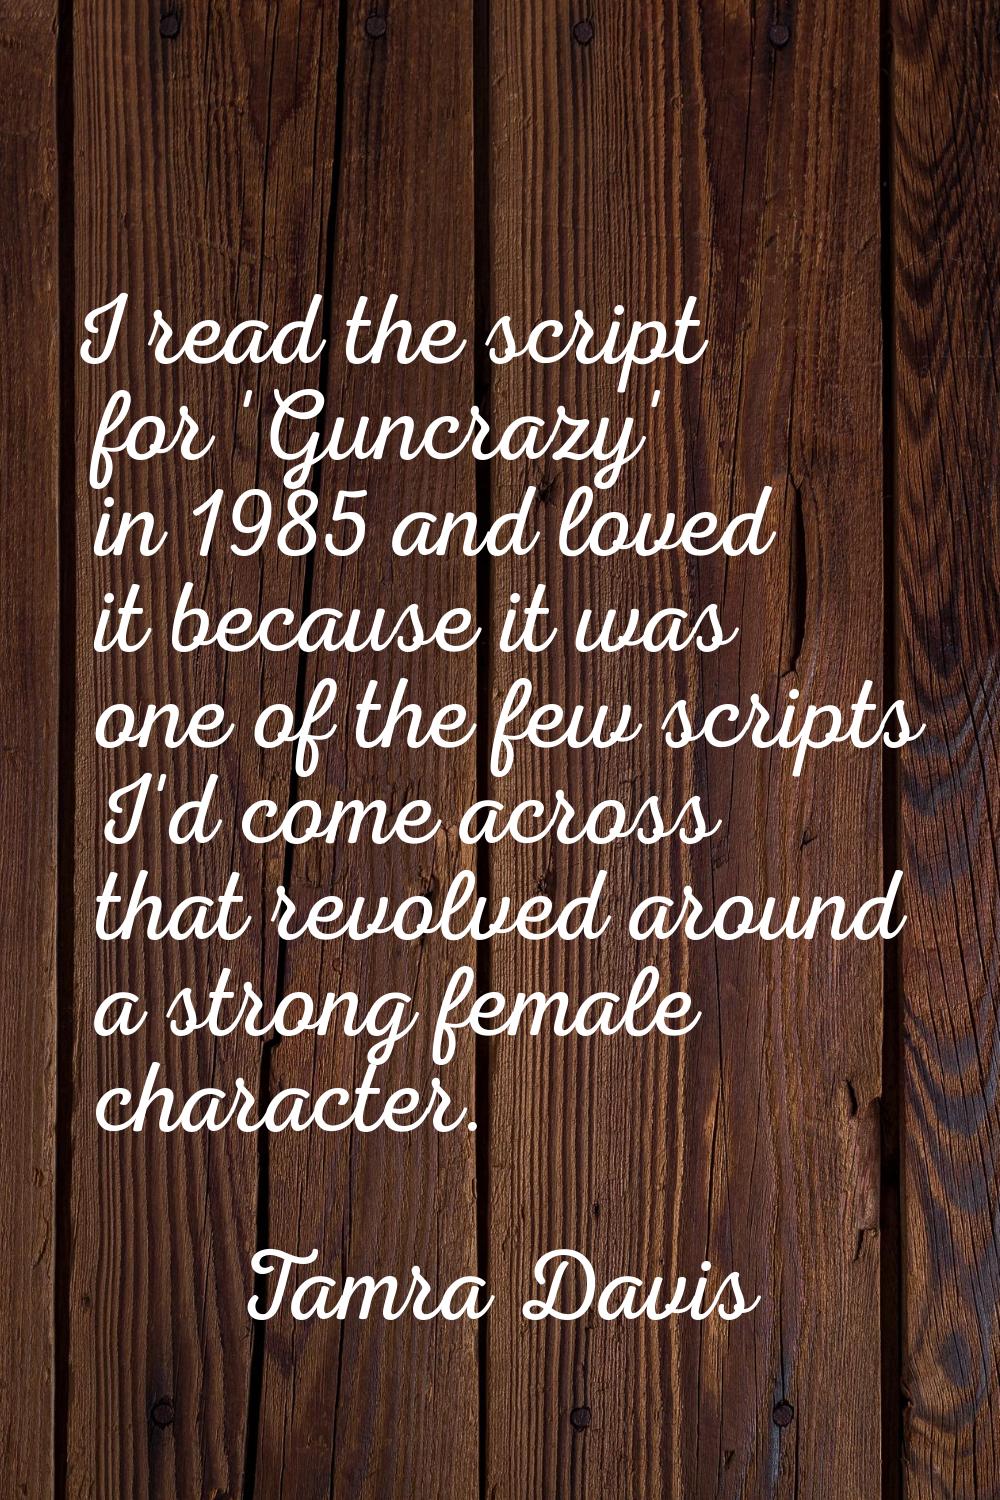 I read the script for 'Guncrazy' in 1985 and loved it because it was one of the few scripts I'd com